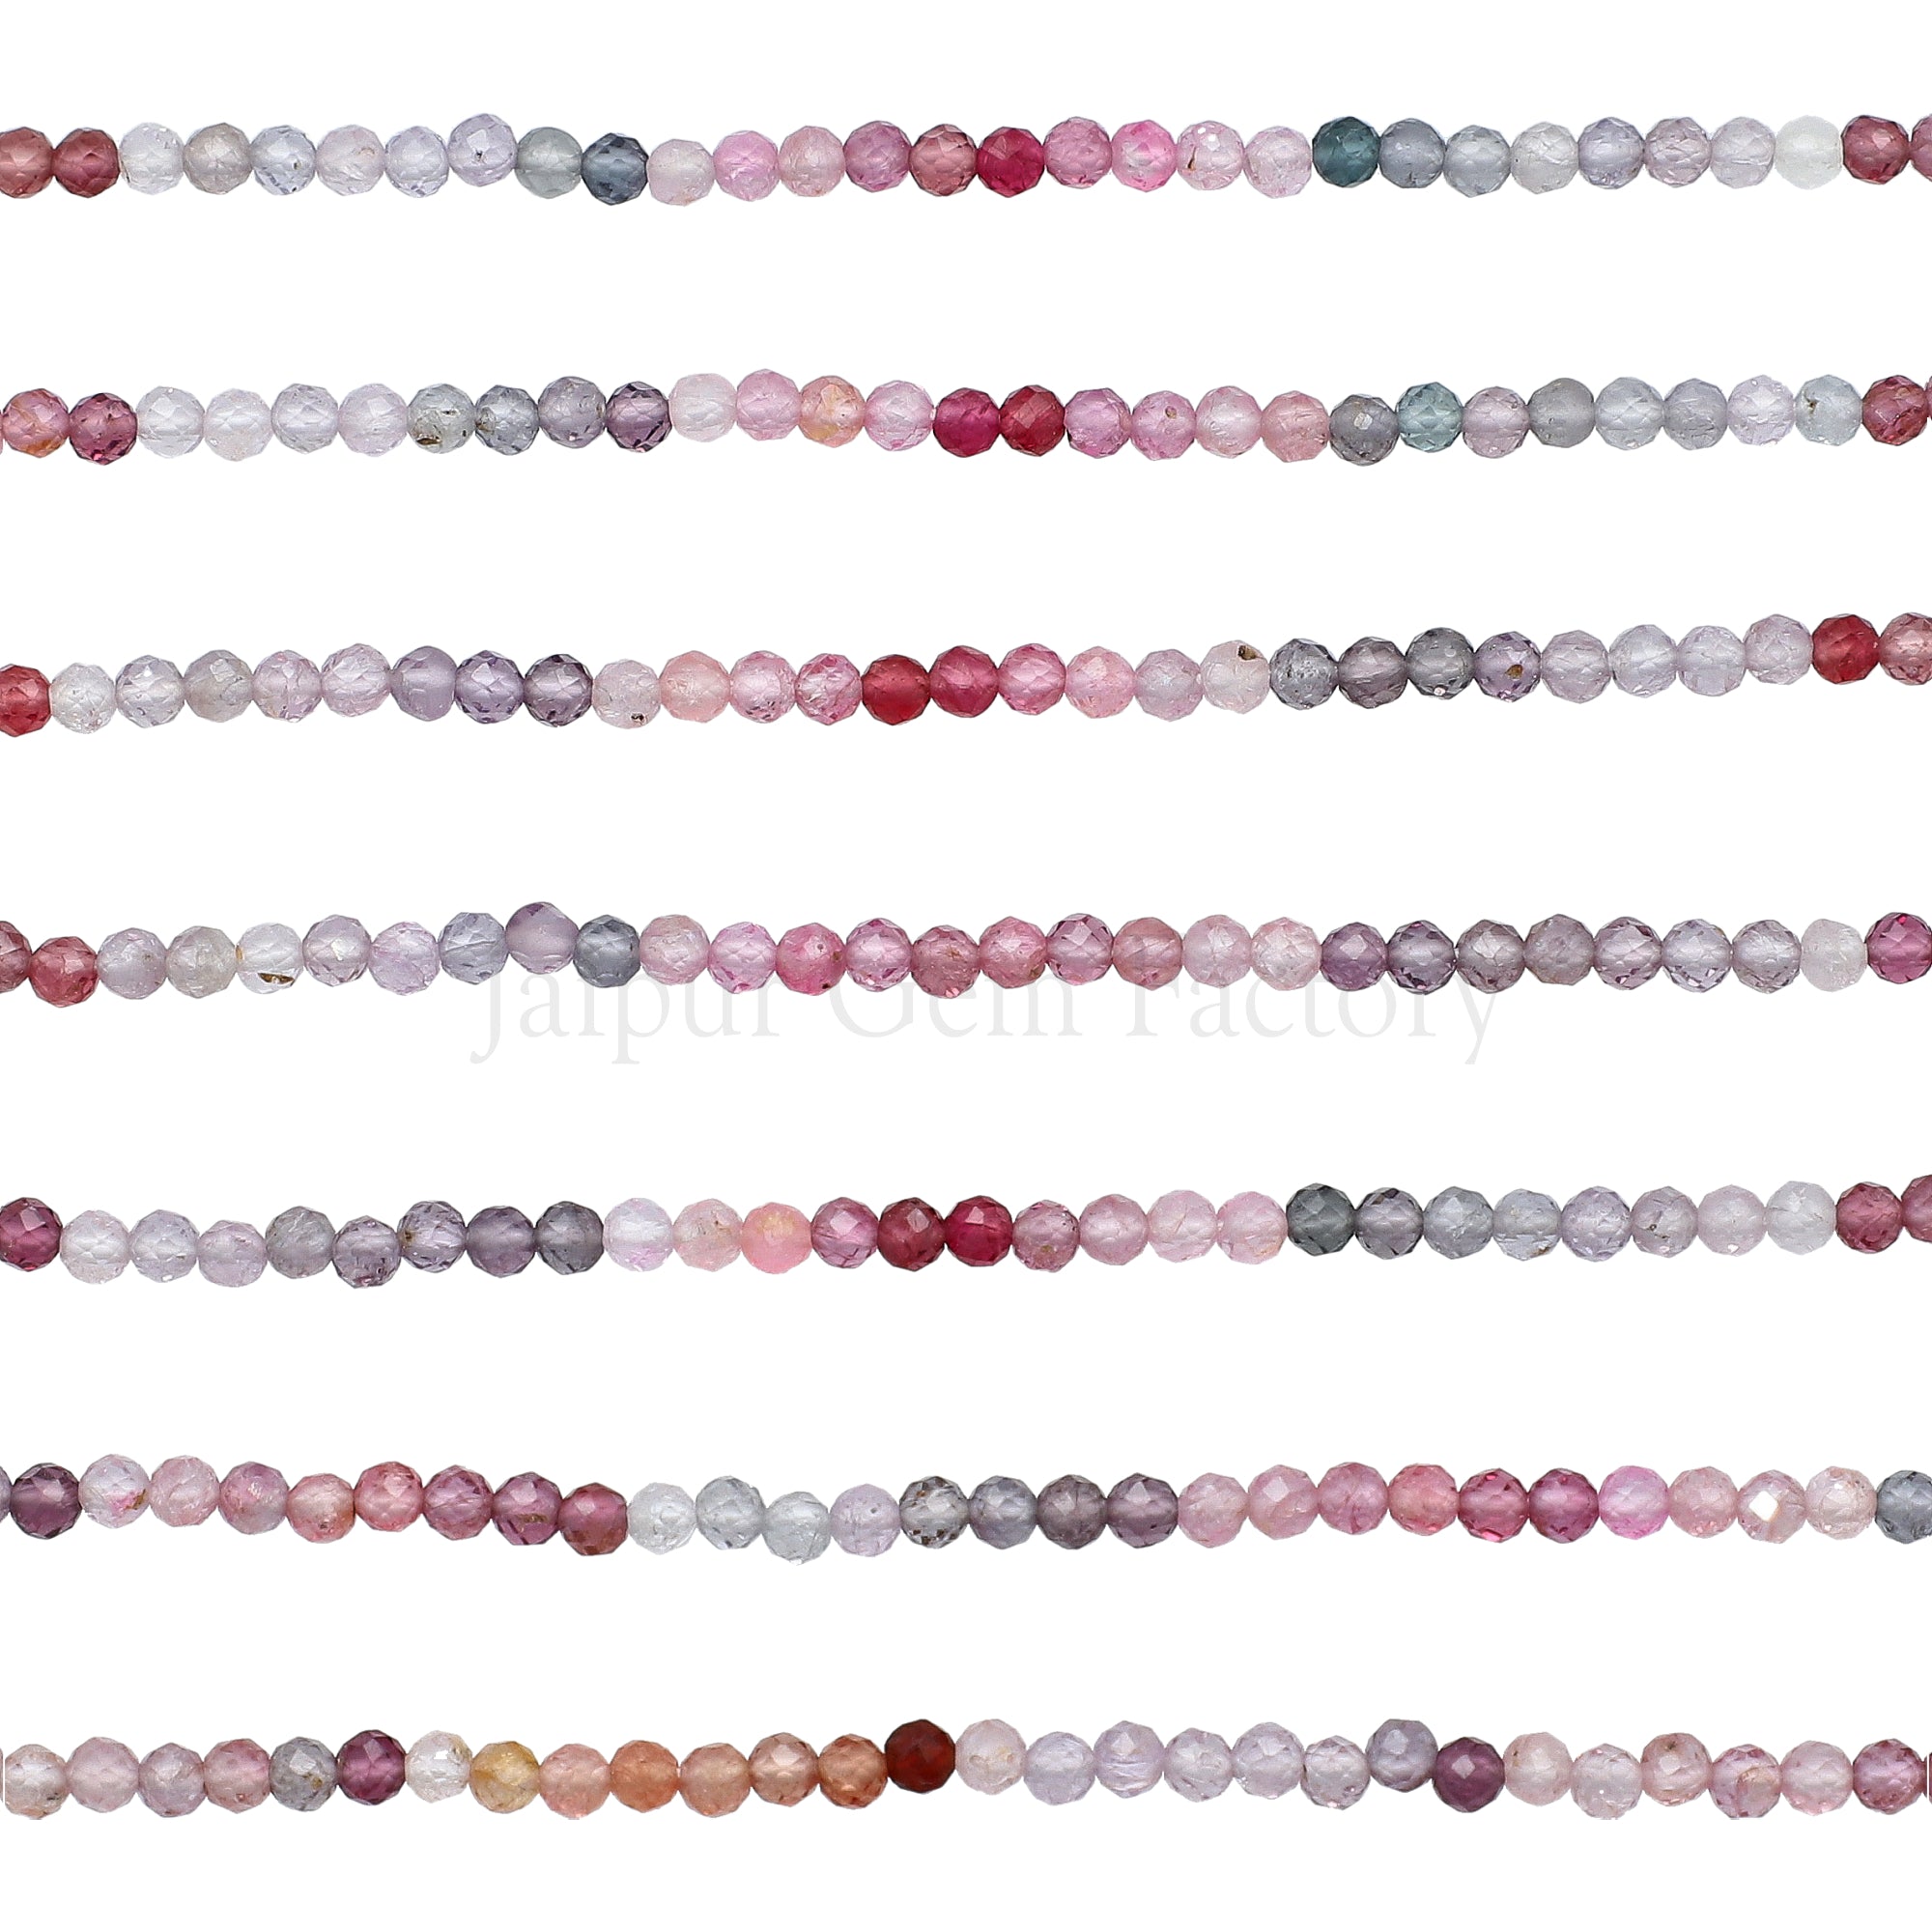 3 MM Multi Spinel Faceted Round Beads